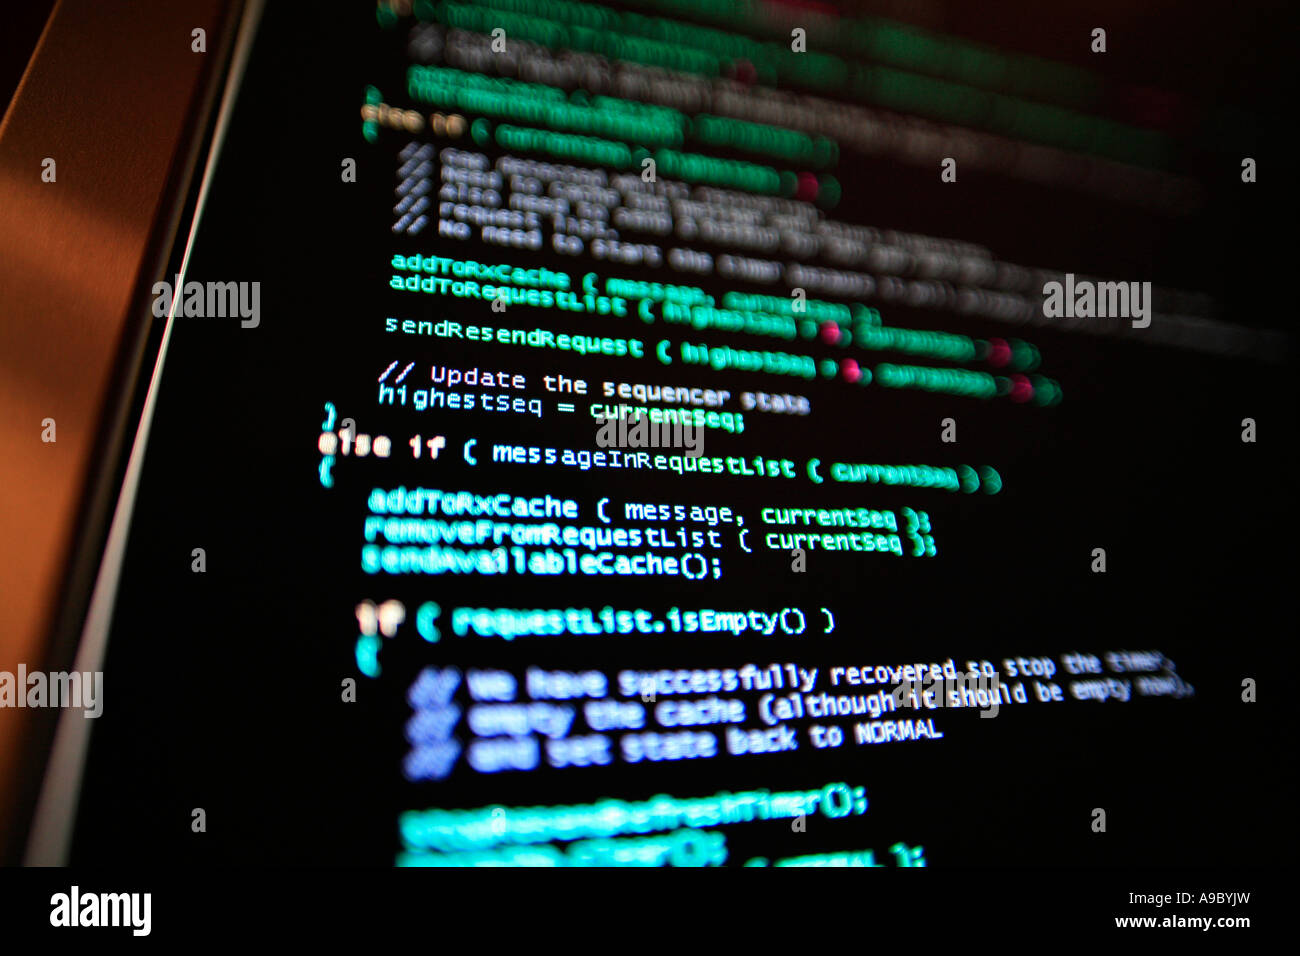 Highly technical looking computer program on screen in darkened room Stock Photo